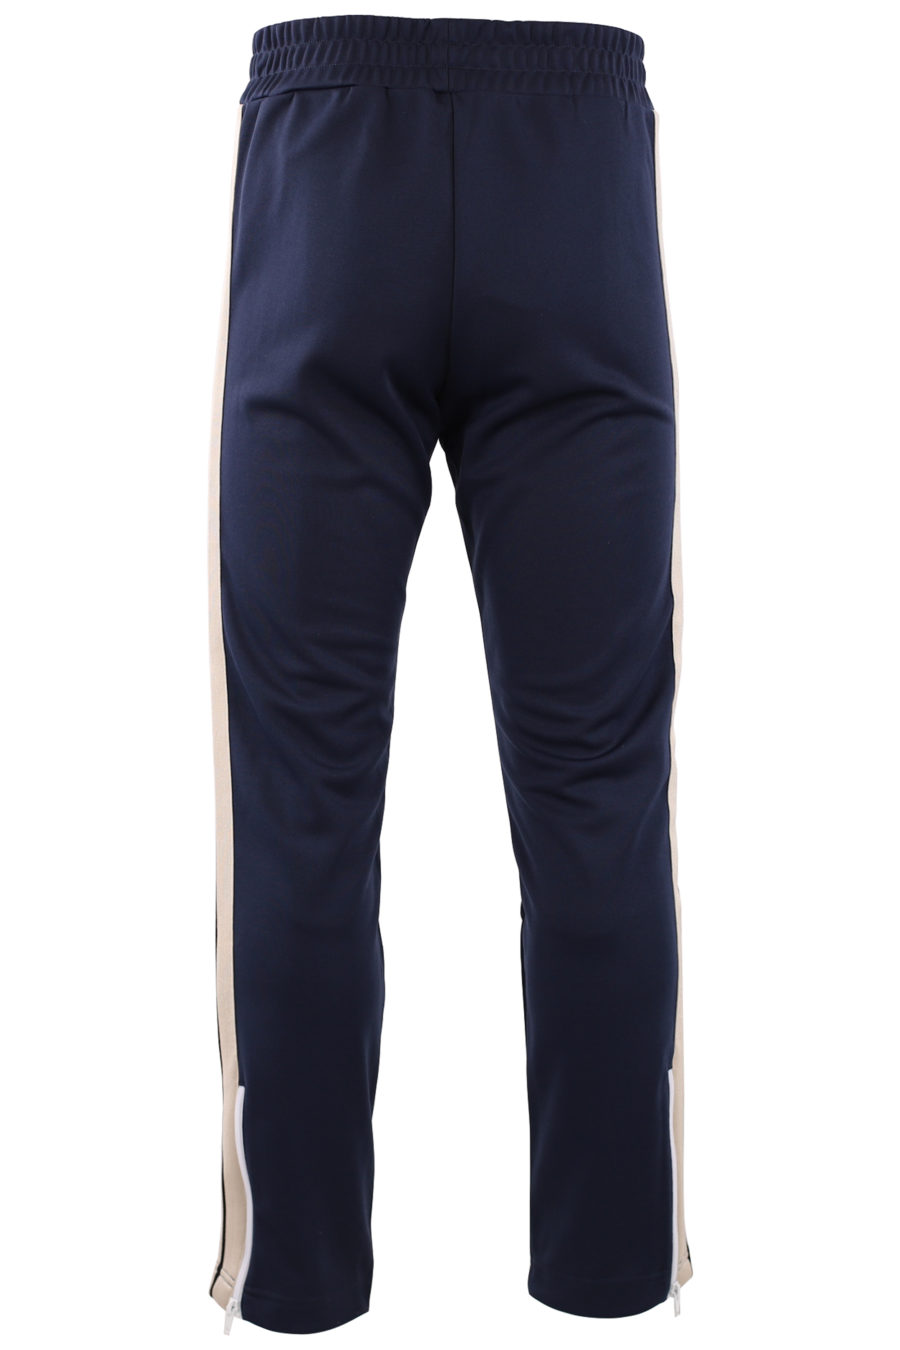 Blue trousers with logo and side stripes - IMG1 9292